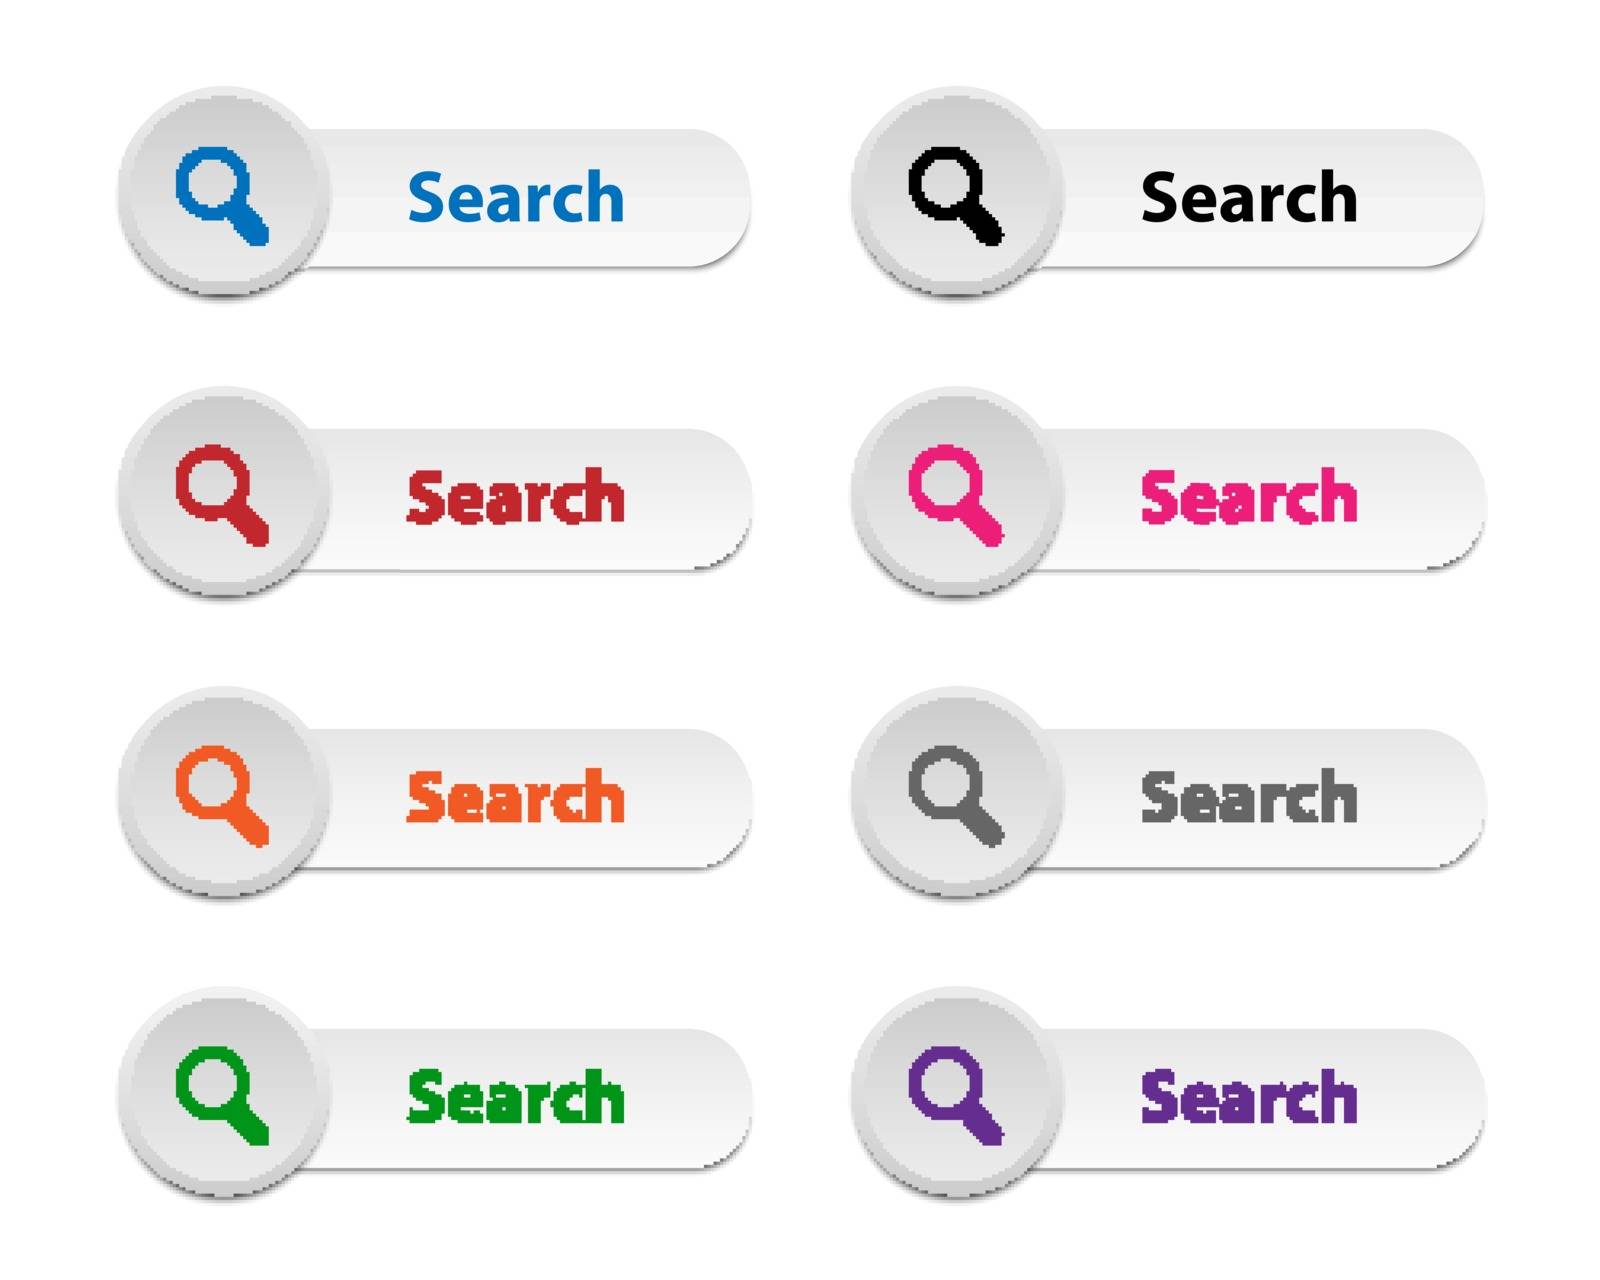 Search buttons by simo988